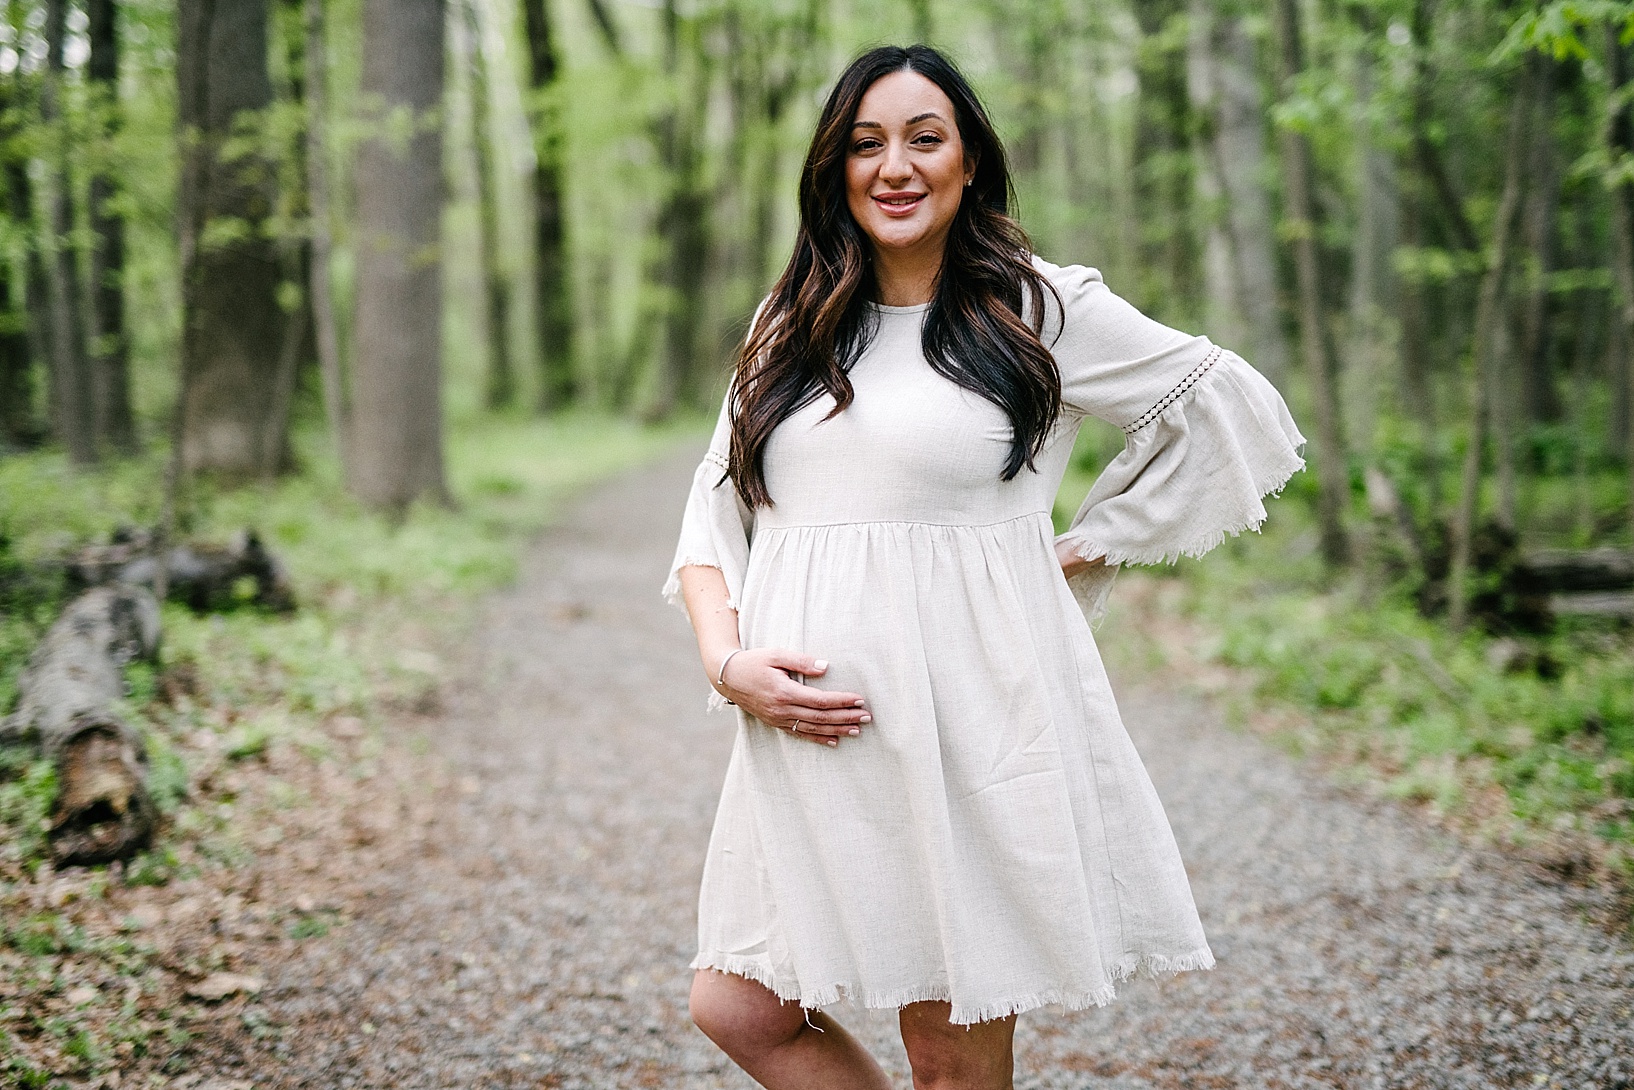 Soon-to-be mom holds baby bump in woods maternity photography